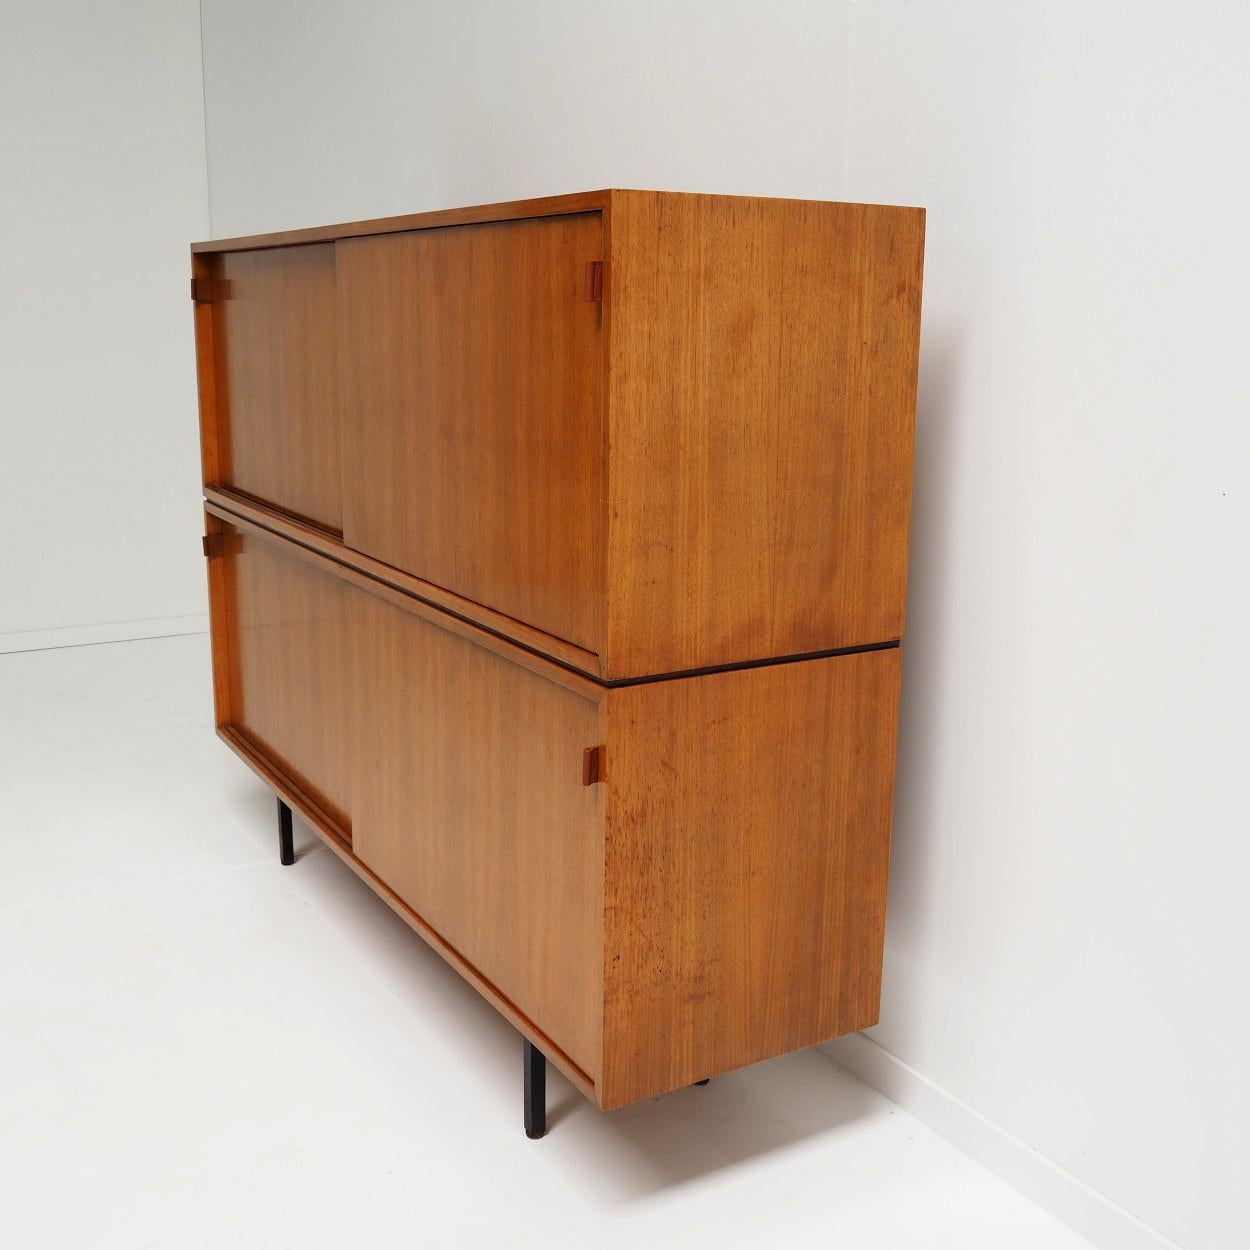 Belgian Double Decker Sideboard by Female Designer Florence Knoll for Knoll Inc